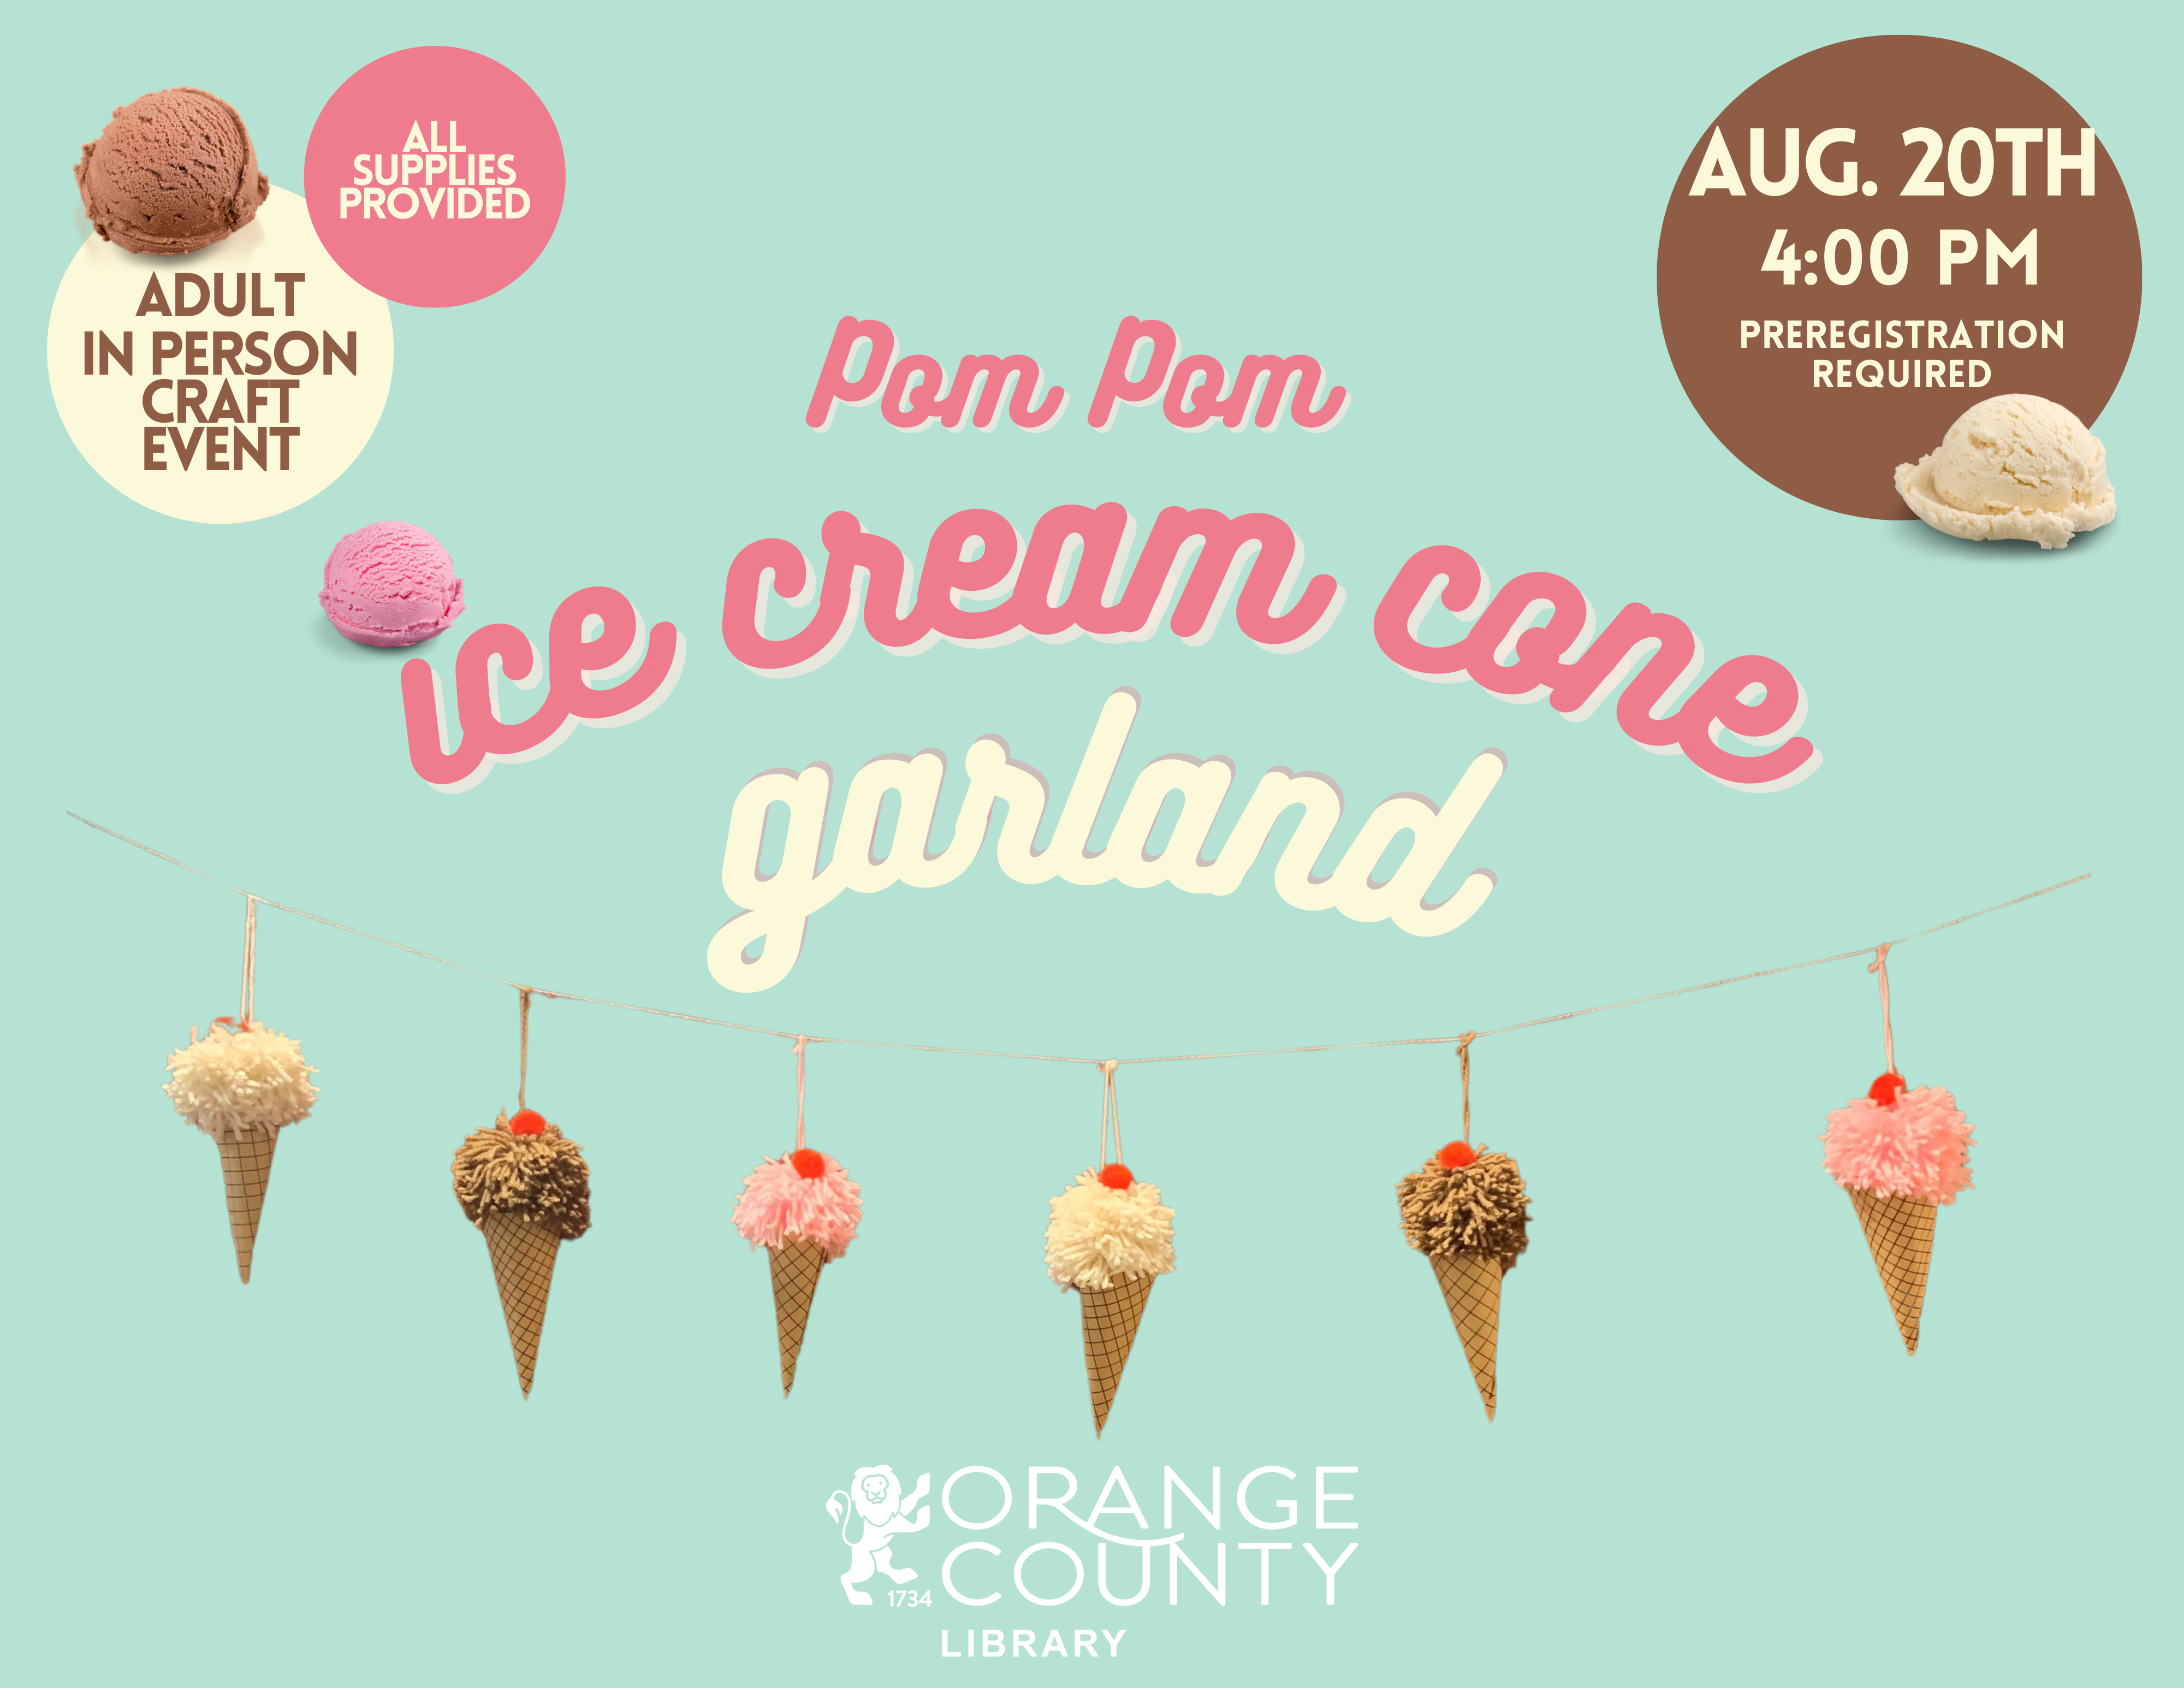 Pom Pom Ice Cream Garland. Adult in-person craft event. All supplies provided. Aug. 20th 4:00 p.m. Orange County Public Library logo.